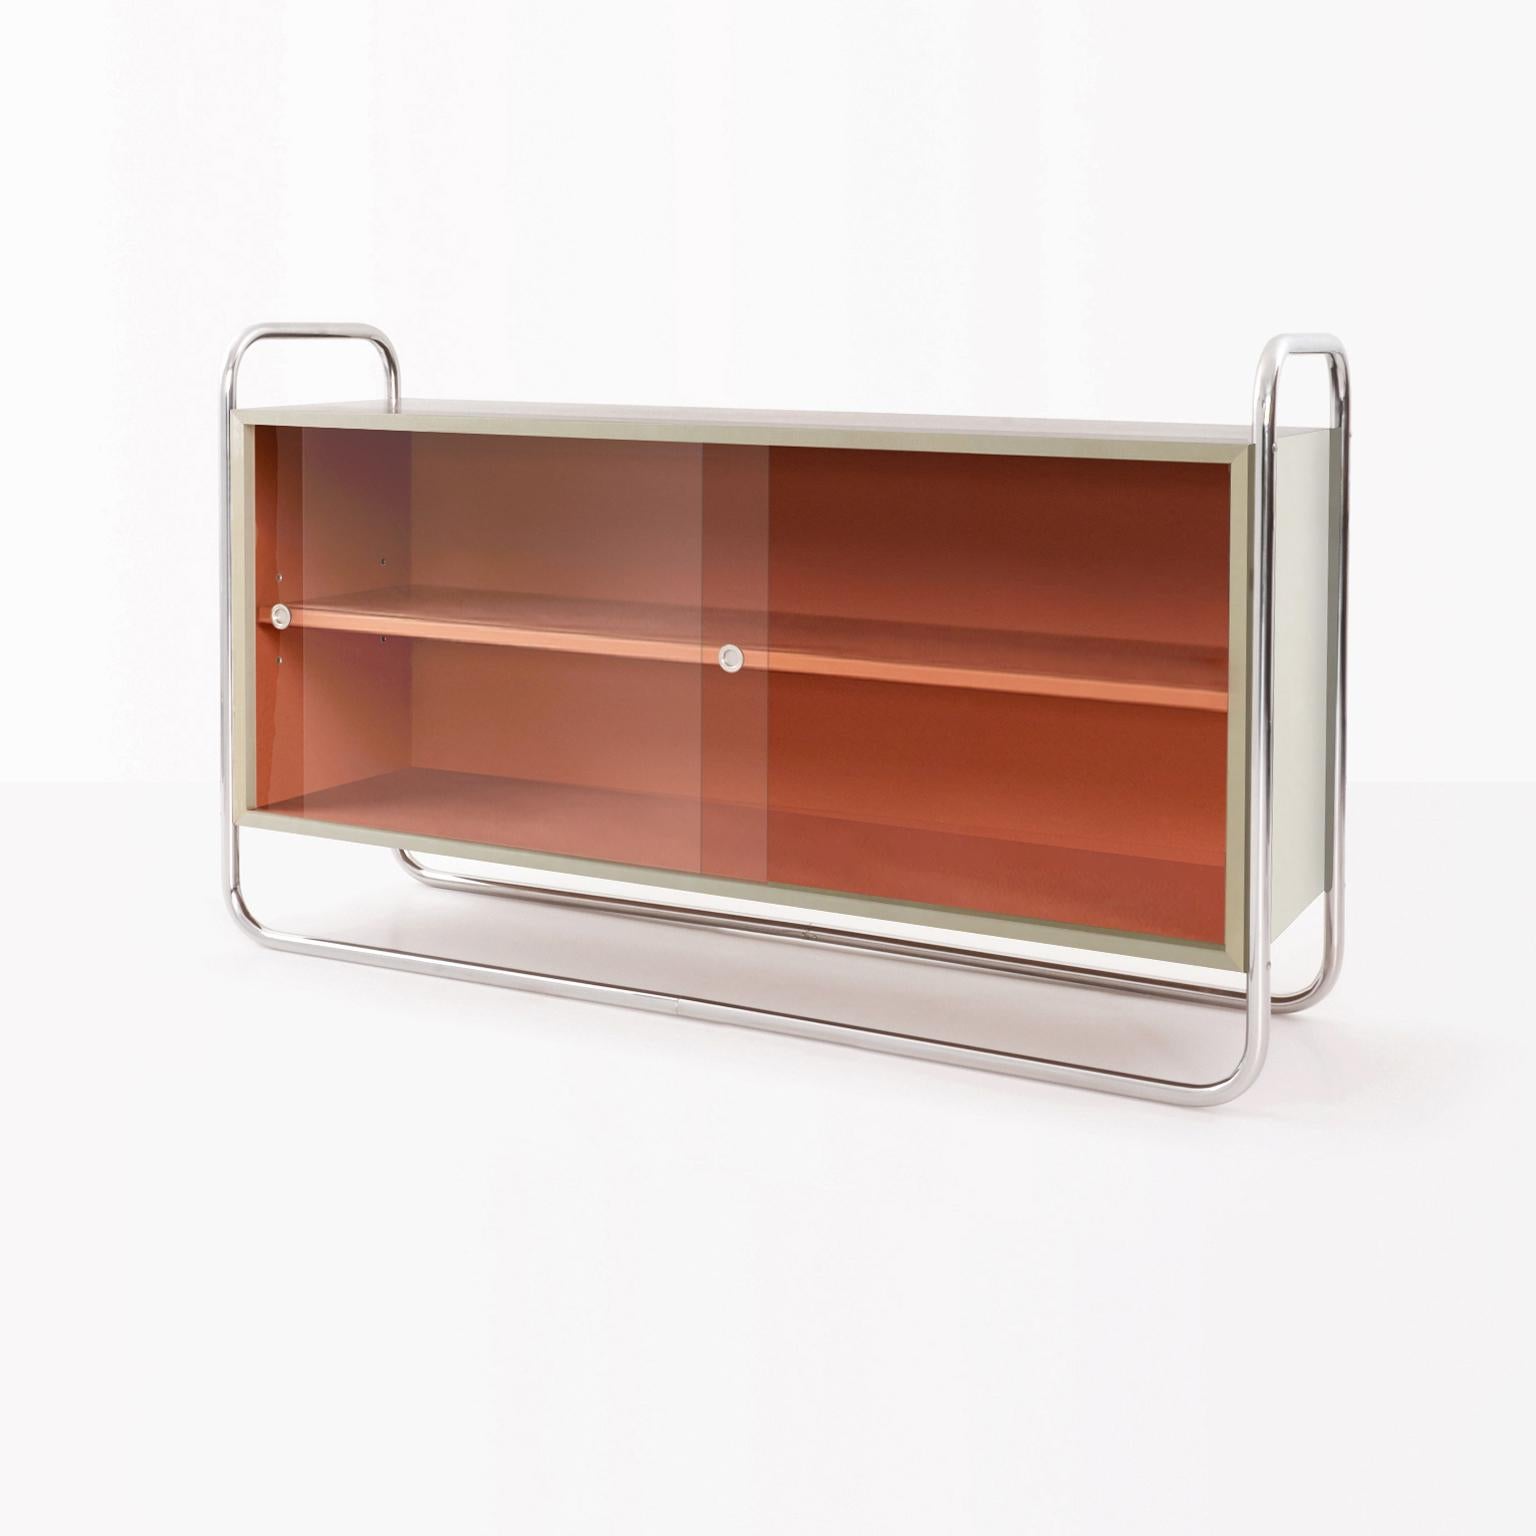 Bauhaus tubular steel low bookcase with case in chrome plated metal, lacquered blockboard and sliding glass panels. 
